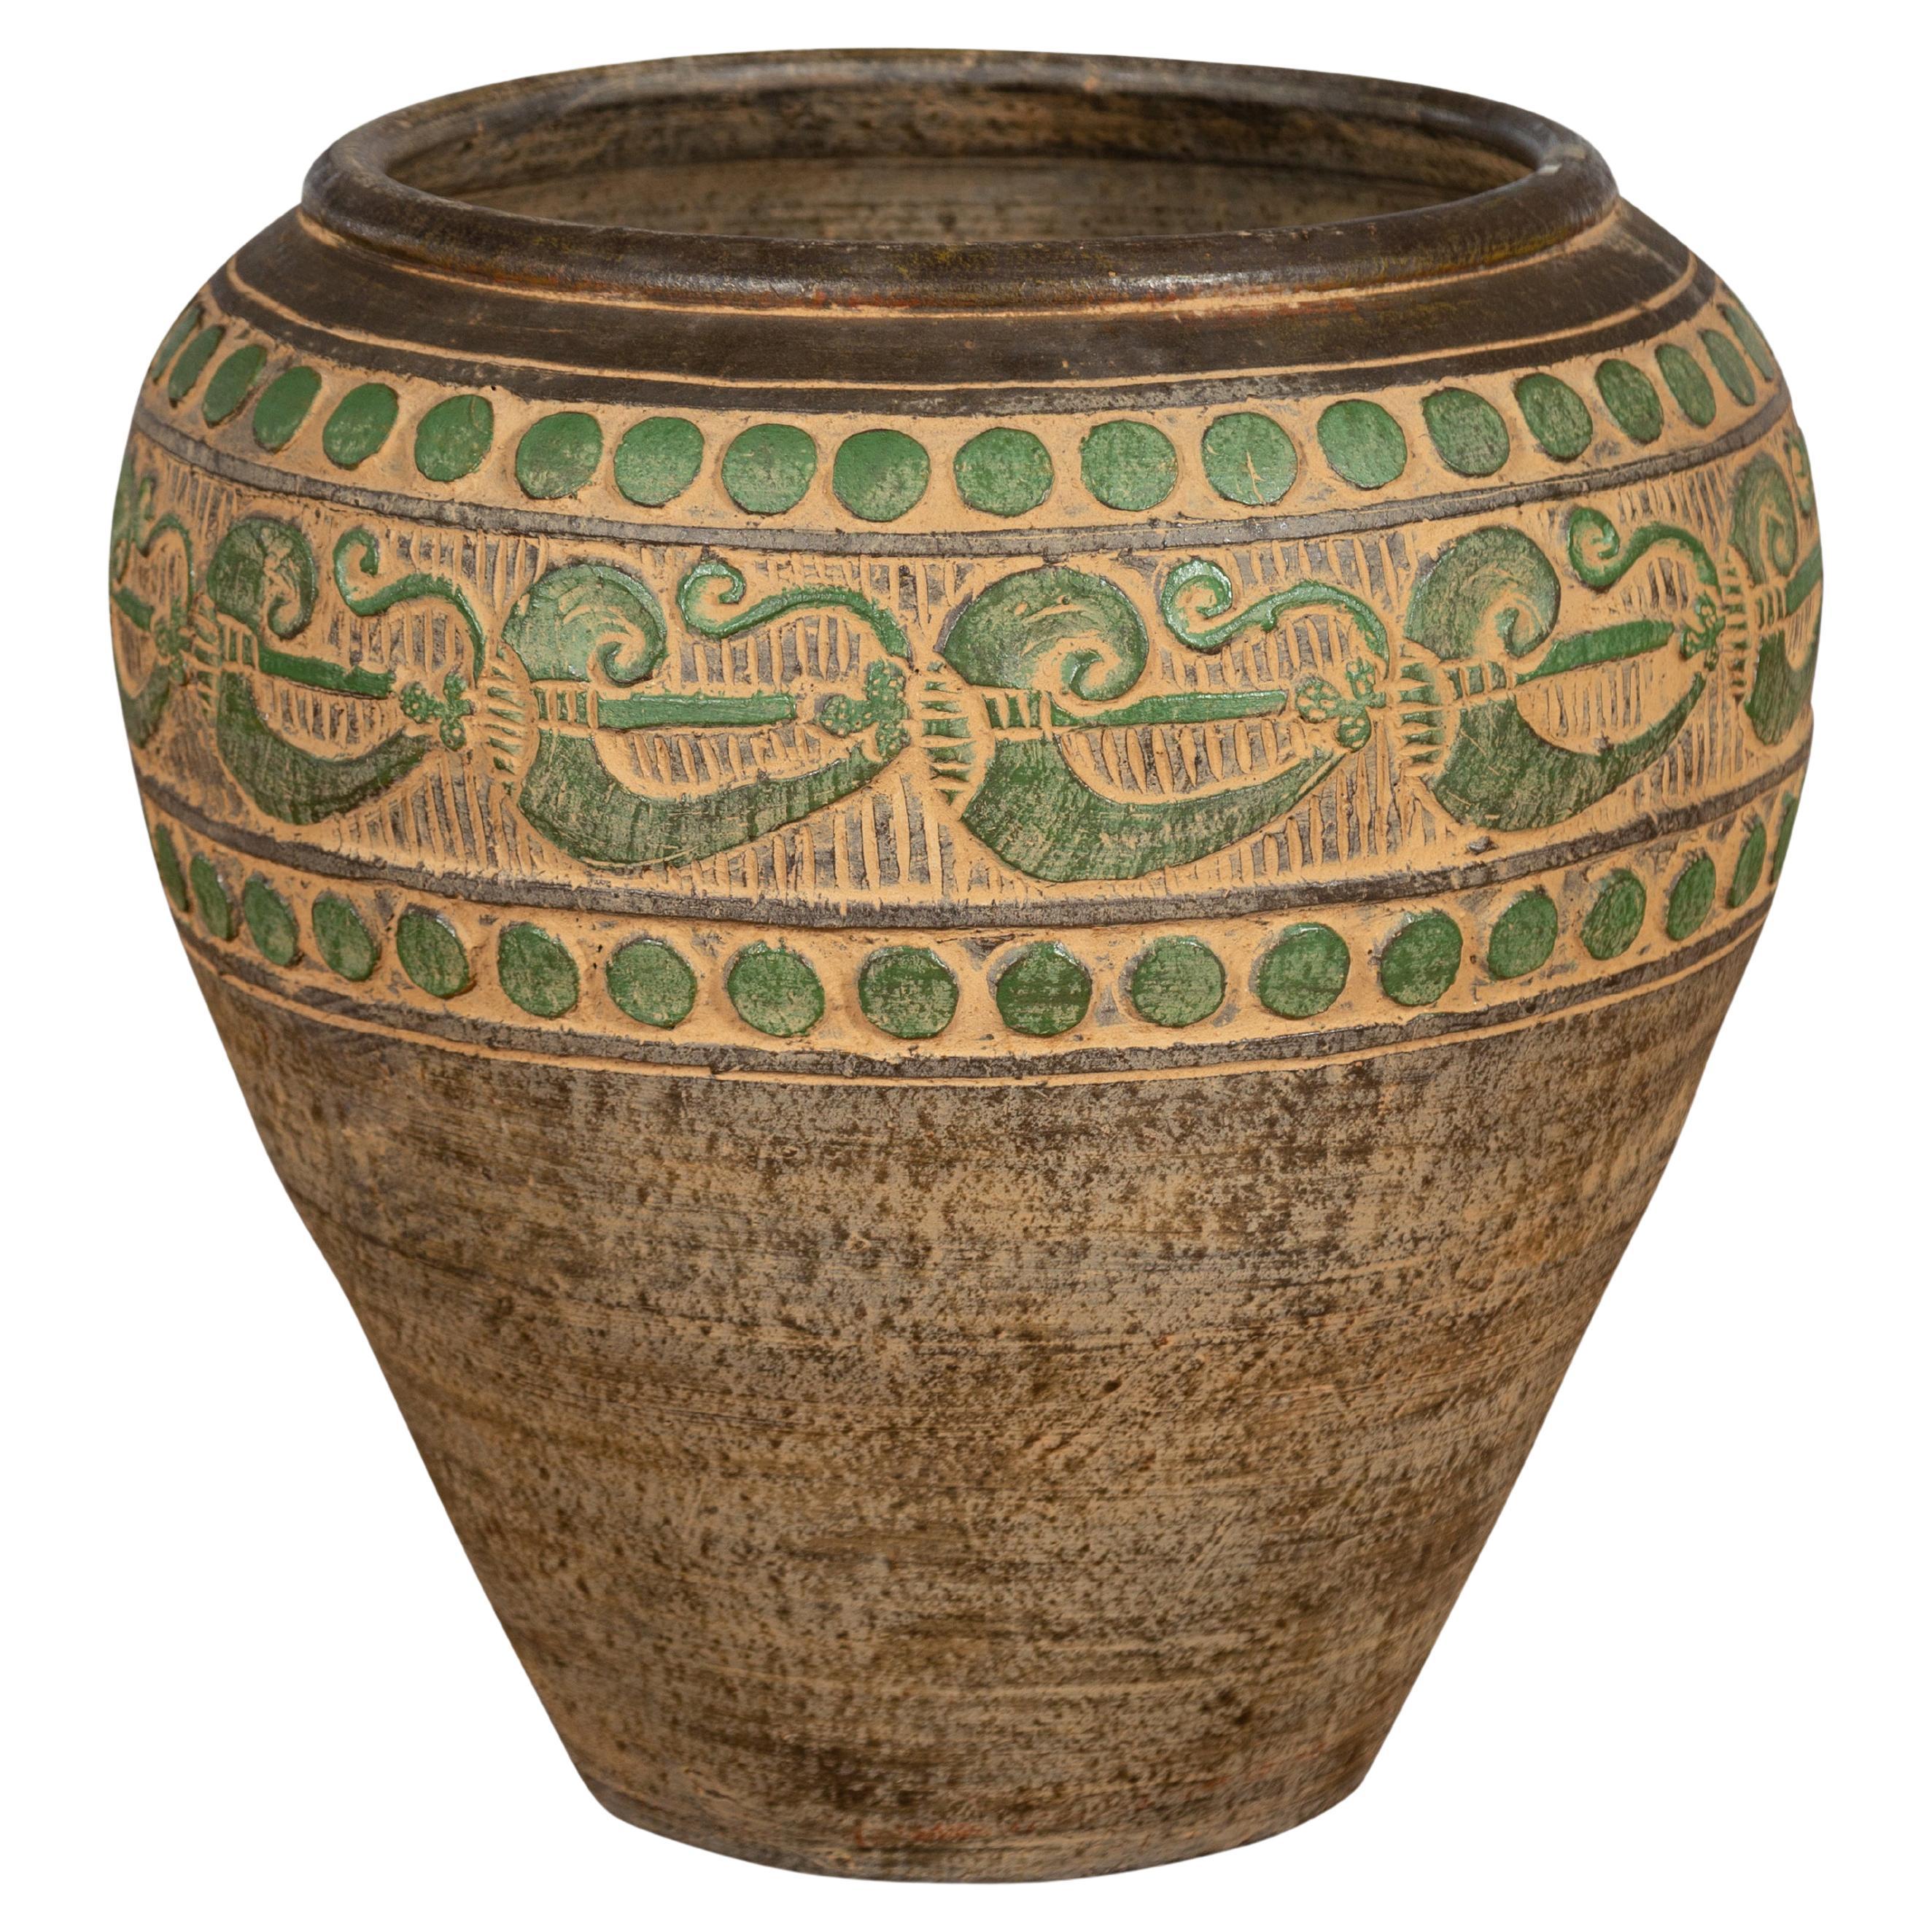 Vintage Thai Brown Ceramic Jar with Green Scrolling and Spherical Accents